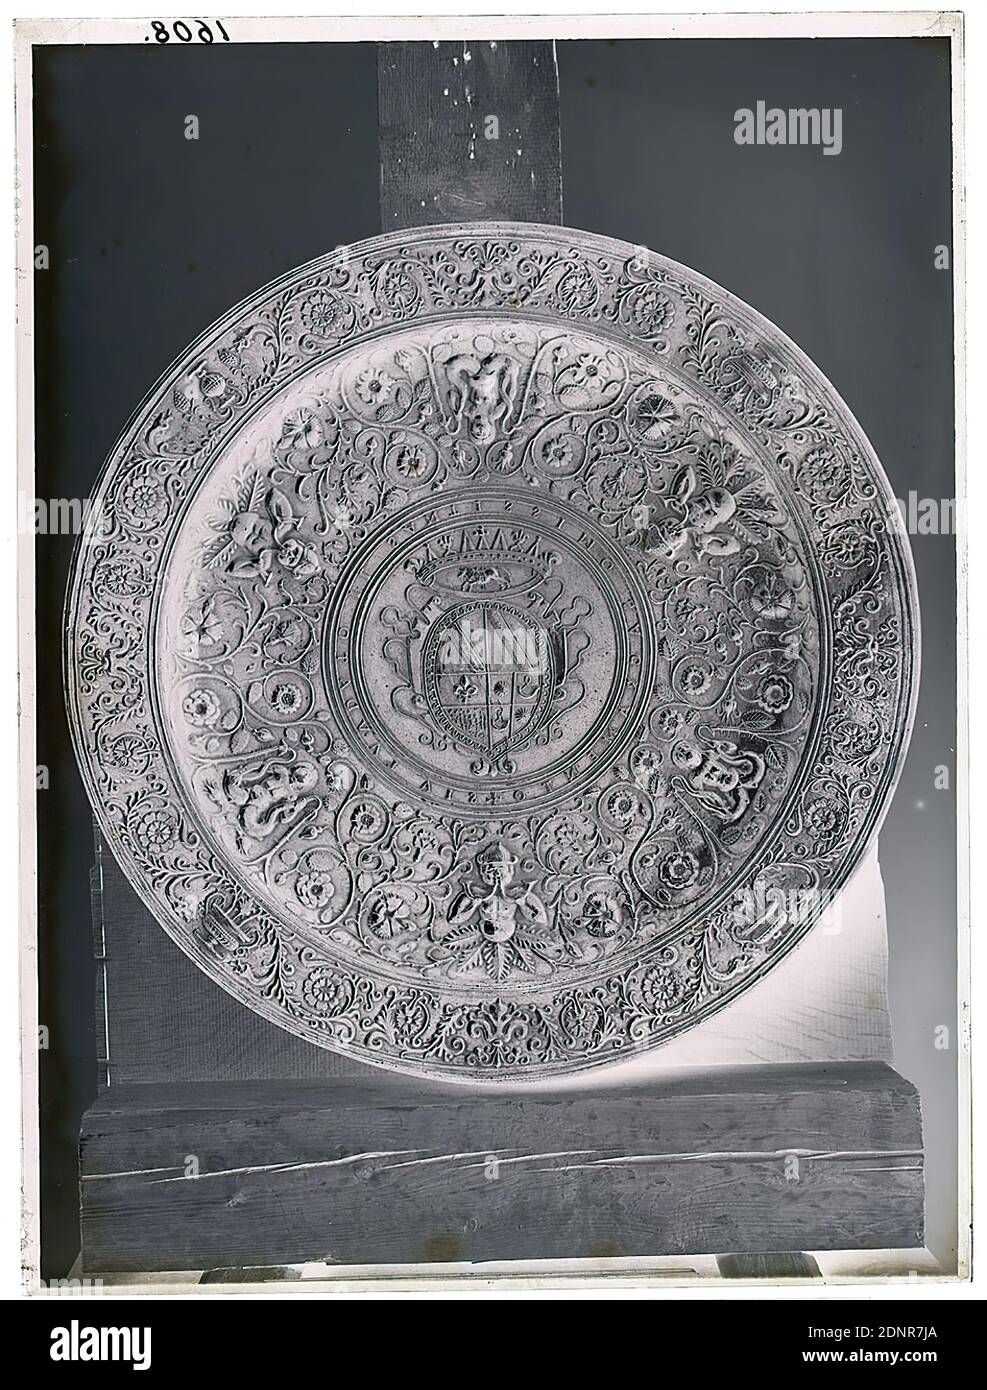 Wilhelm Weimar, plate with coat of arms, glass negative, black and white negative process, total: height: 23.8 cm; width: 17.8 cm, numbered: top left : in black ink: 1608, plate, plate, ornaments, flower ornaments, mythical creatures, monsters, legendary figures, grotesque (ornament), coat of arms shield, heraldic symbol Stock Photo